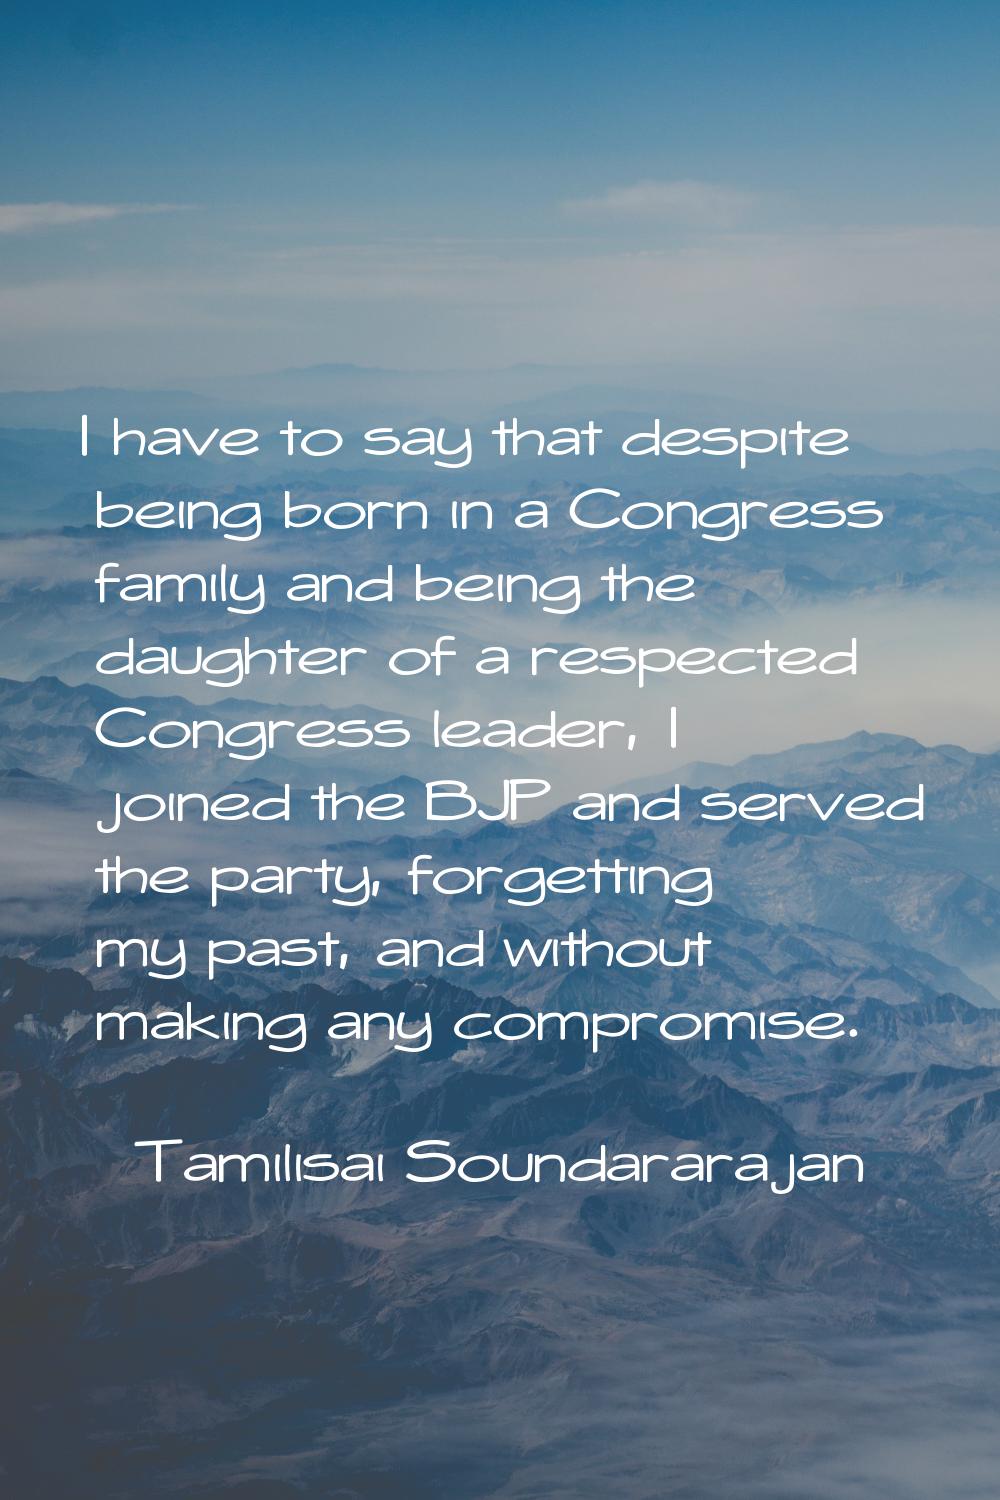 I have to say that despite being born in a Congress family and being the daughter of a respected Co